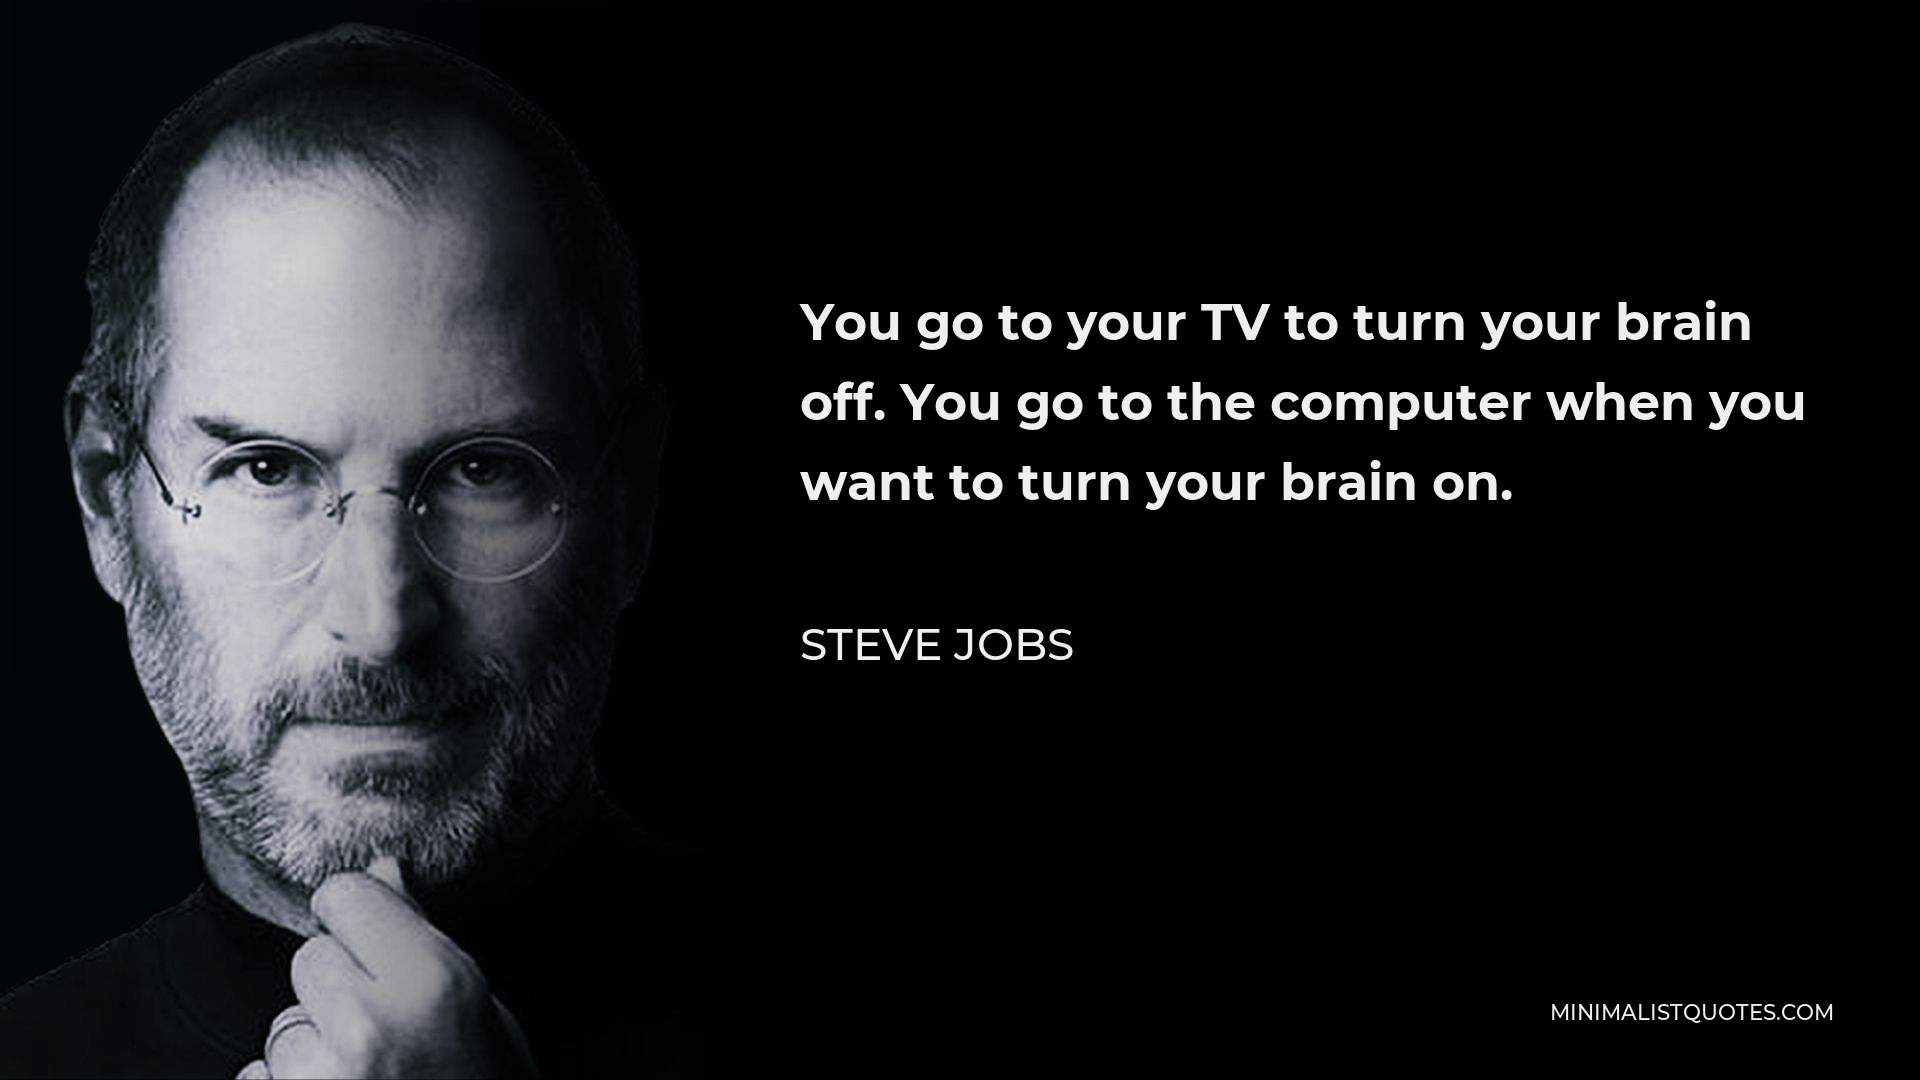 Steve Jobs Quote - You go to your TV to turn your brain off. You go to the computer when you want to turn your brain on.